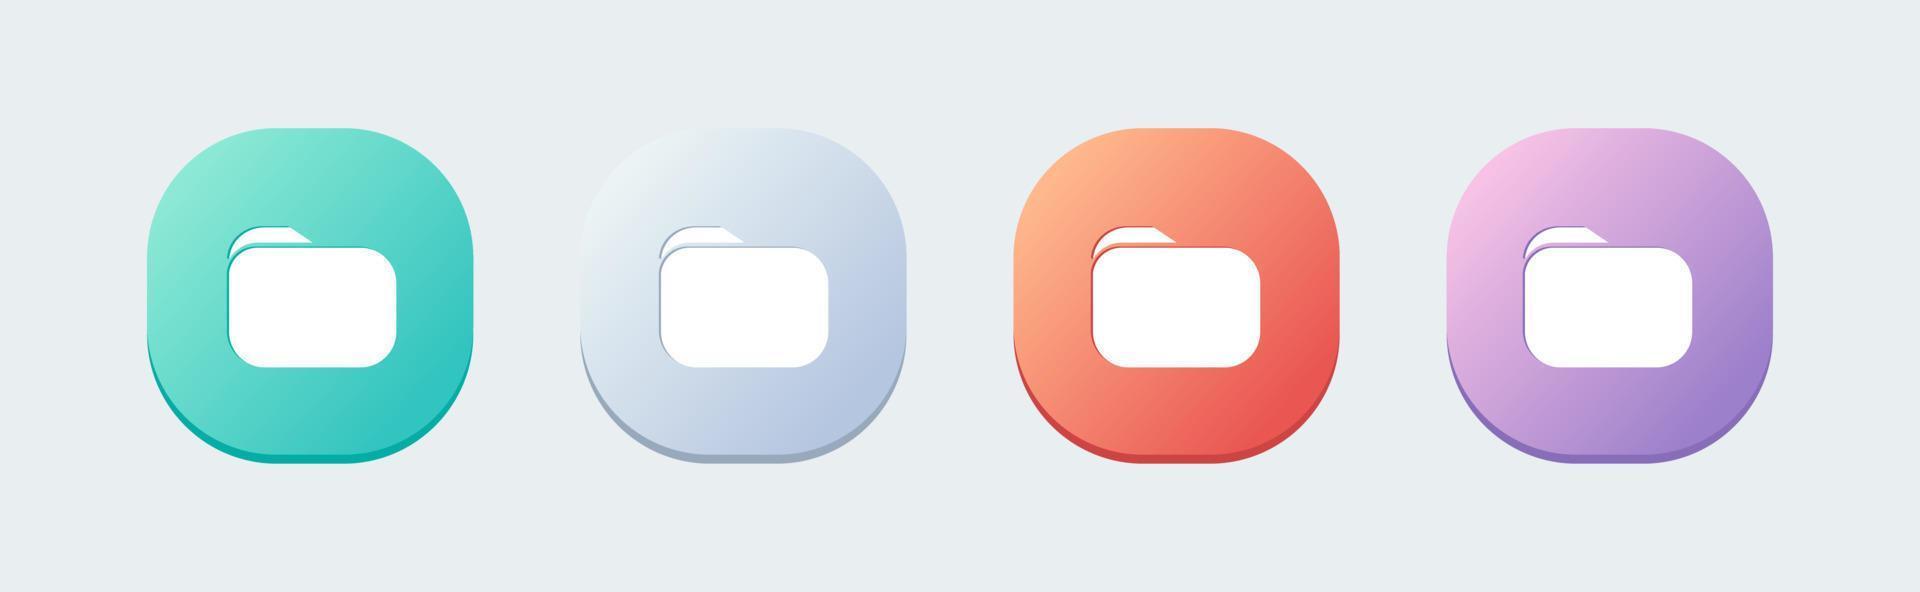 Folder solid icon in flat design style. Modern website or apps interface. vector